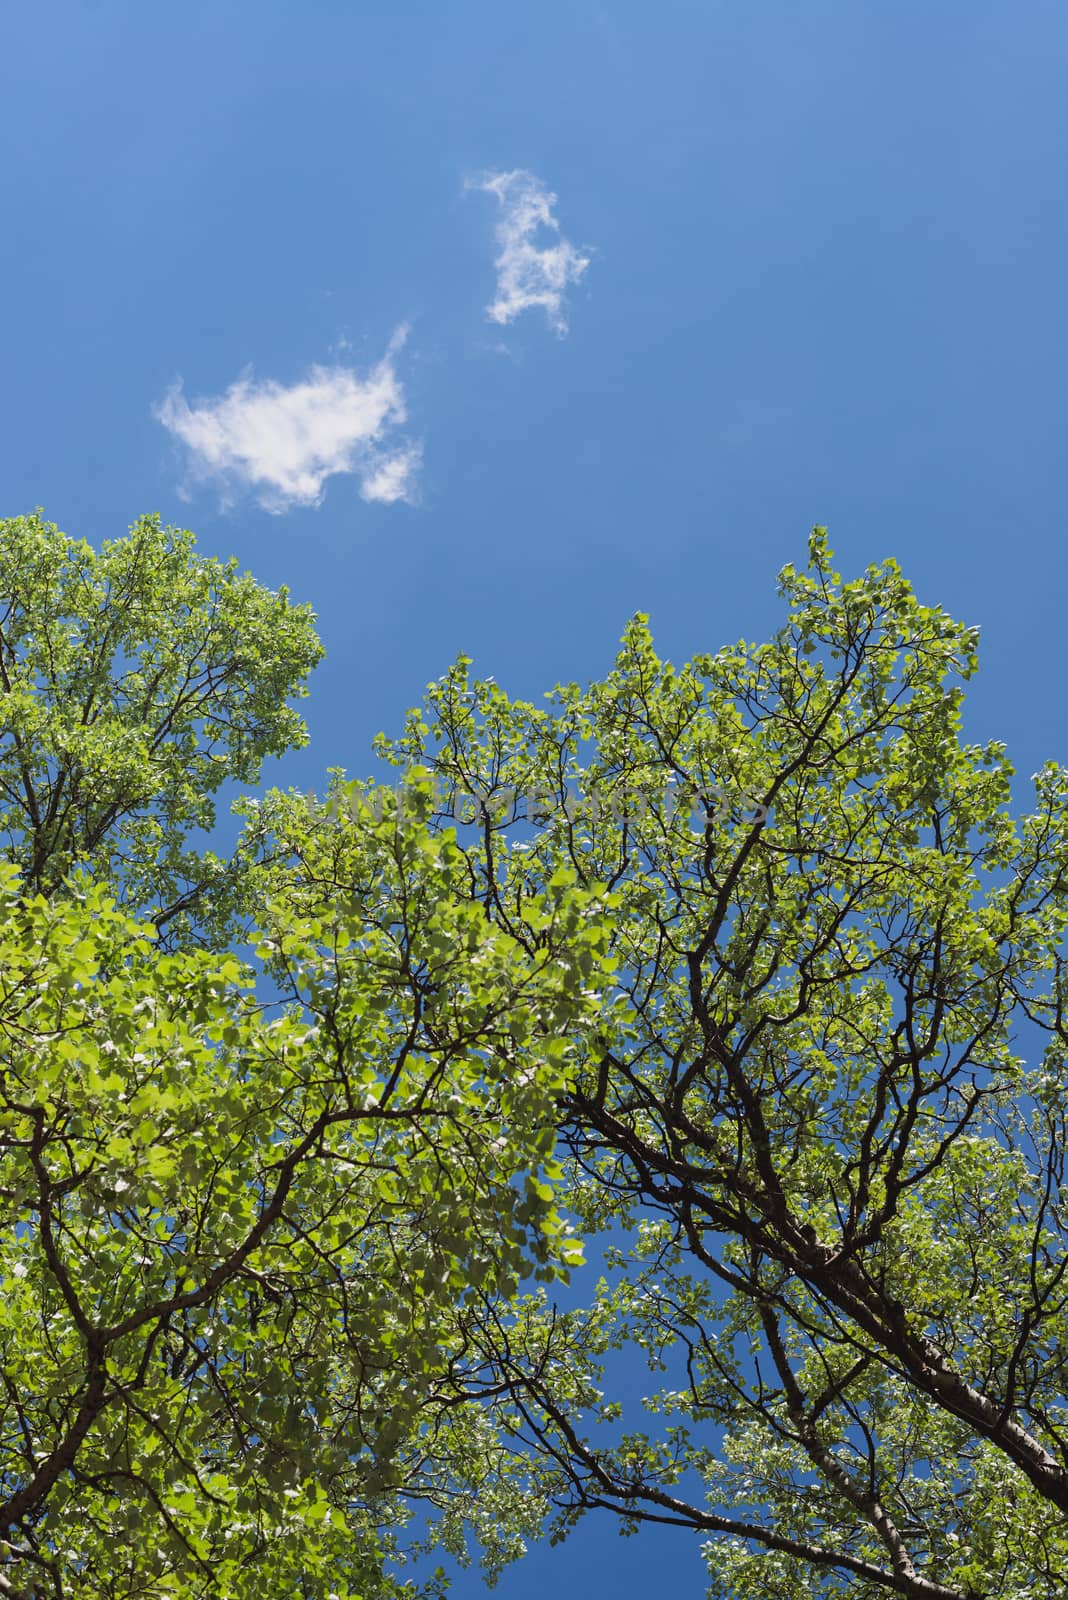 The aspen green leaves on a background of blue sky and clouds